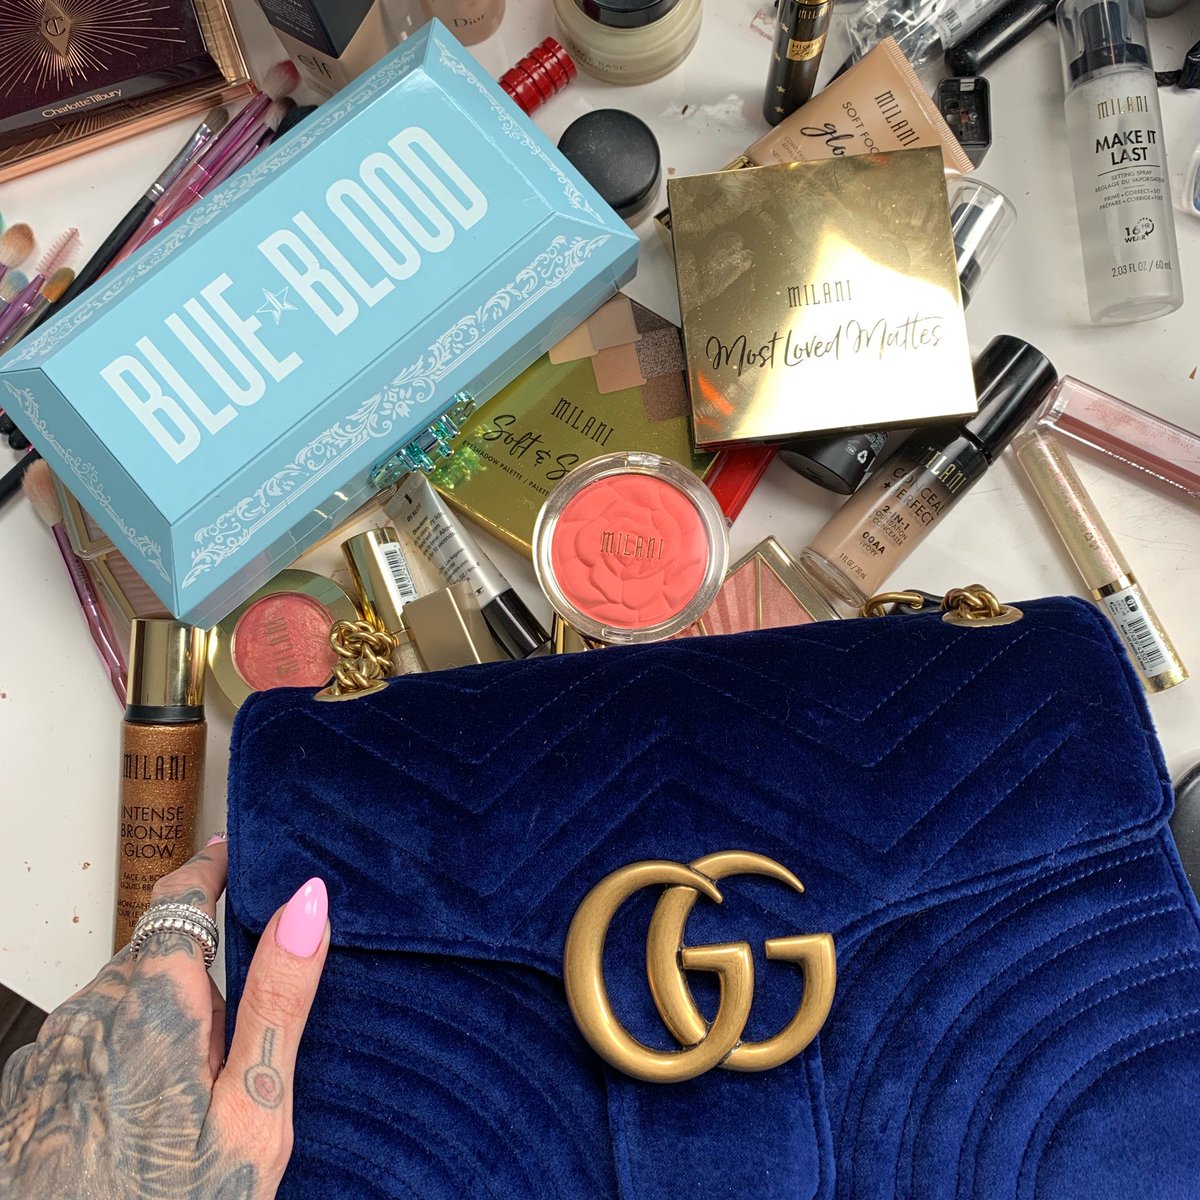 Who’s ready for tomorrow’s giveaway? 💙 4 lucky winners will get: $500 in @milanicosmetics, and a #BlueBlood palette!!!
Grand prize: brand new Blue Velvet @Gucci bag + palette & Milani makeup!
😇 Details will be in tmrws video intro!